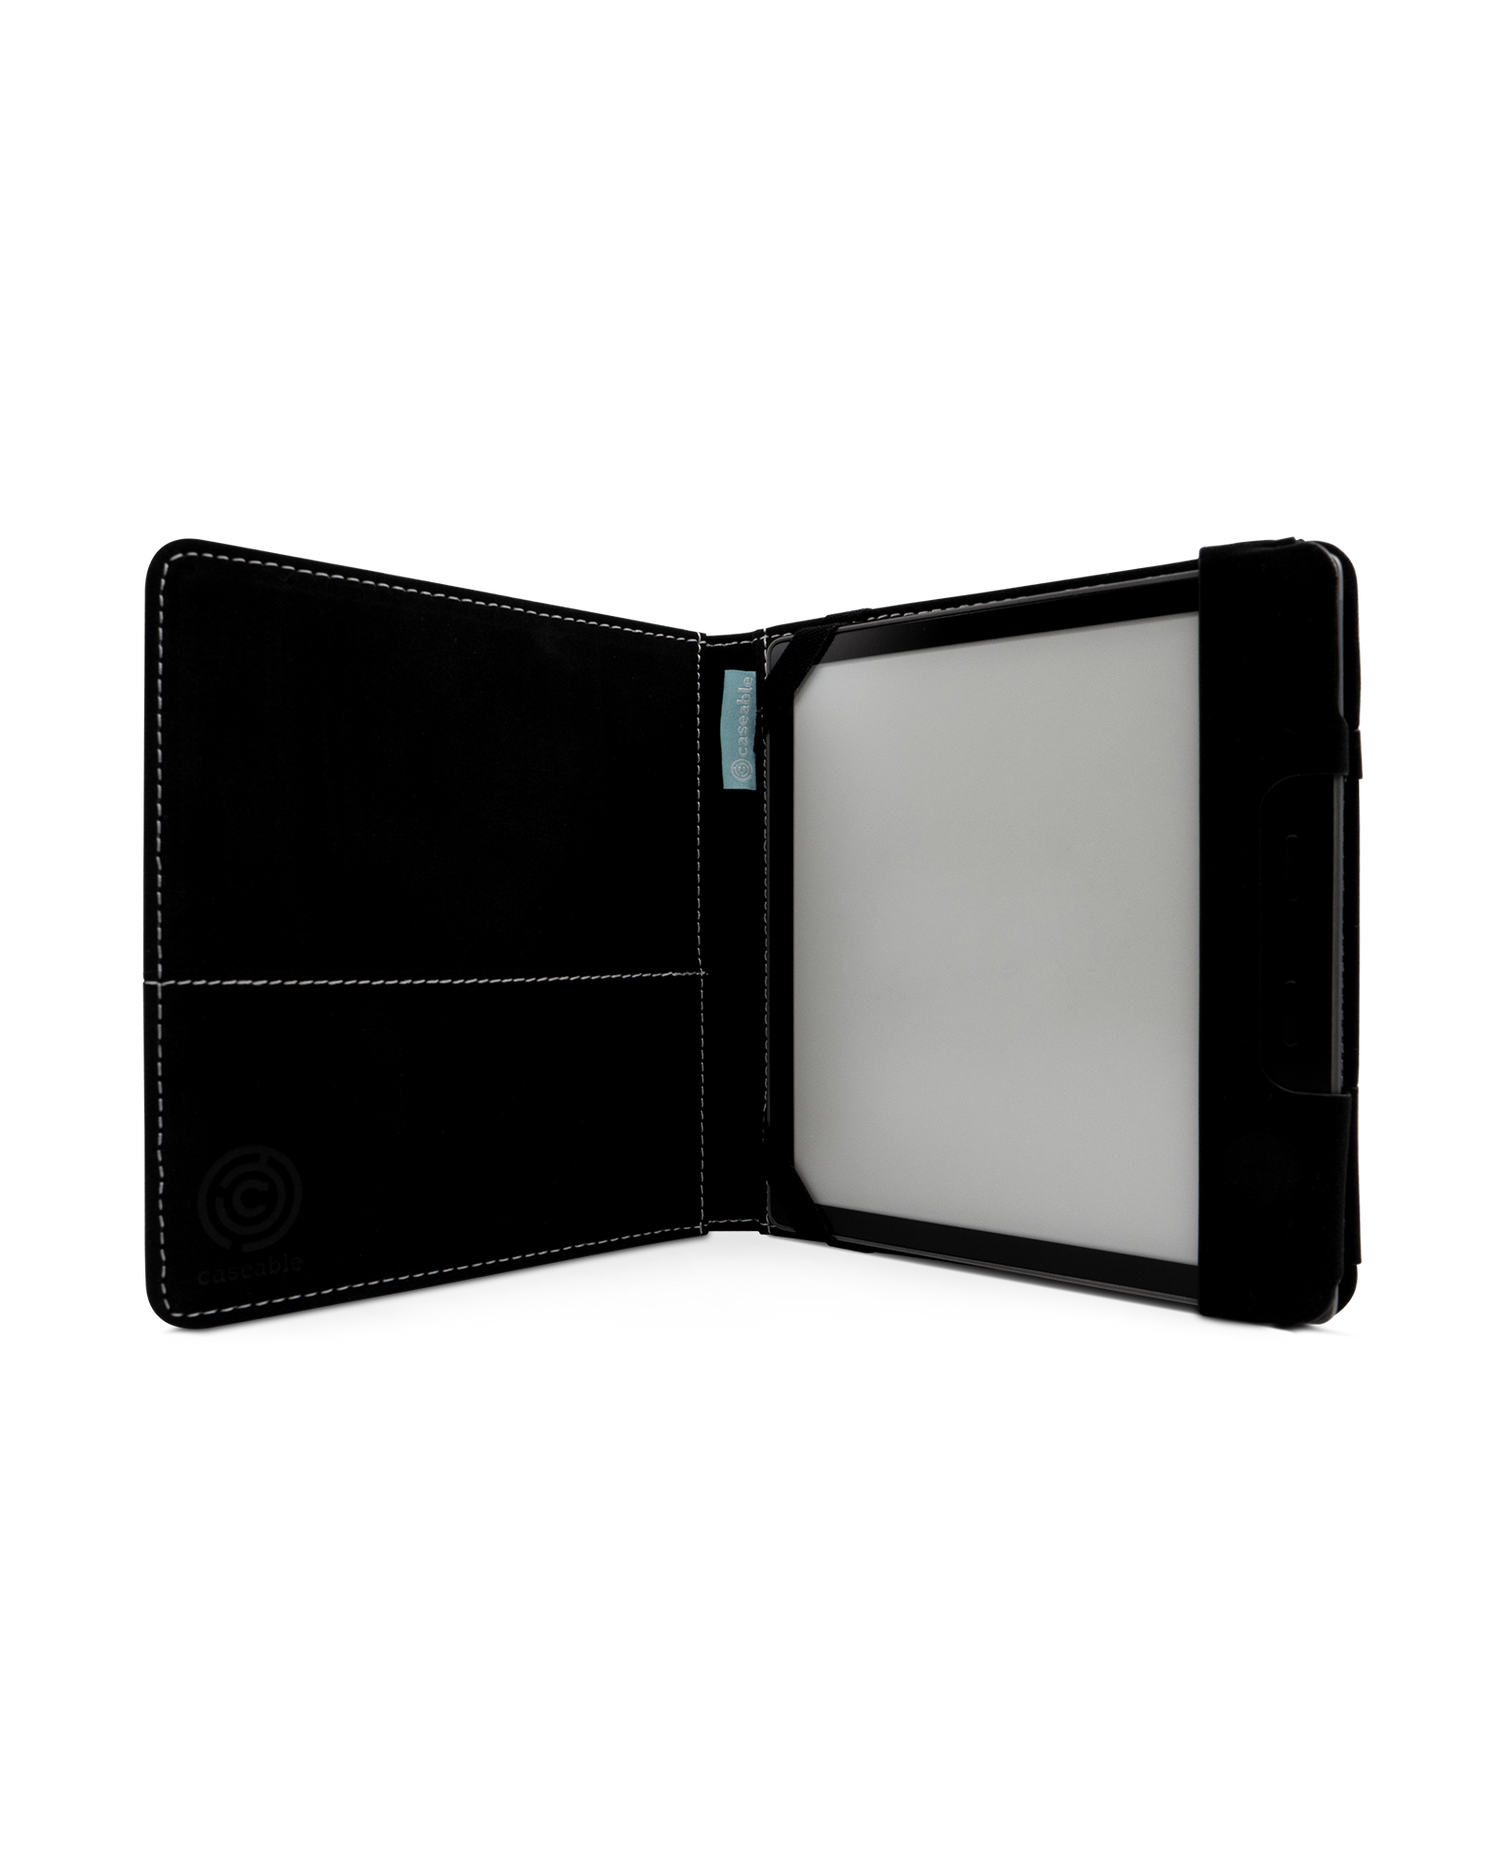 Deep Turquoise Sparkle eReader Case for tolino vision 6: Opened interior view